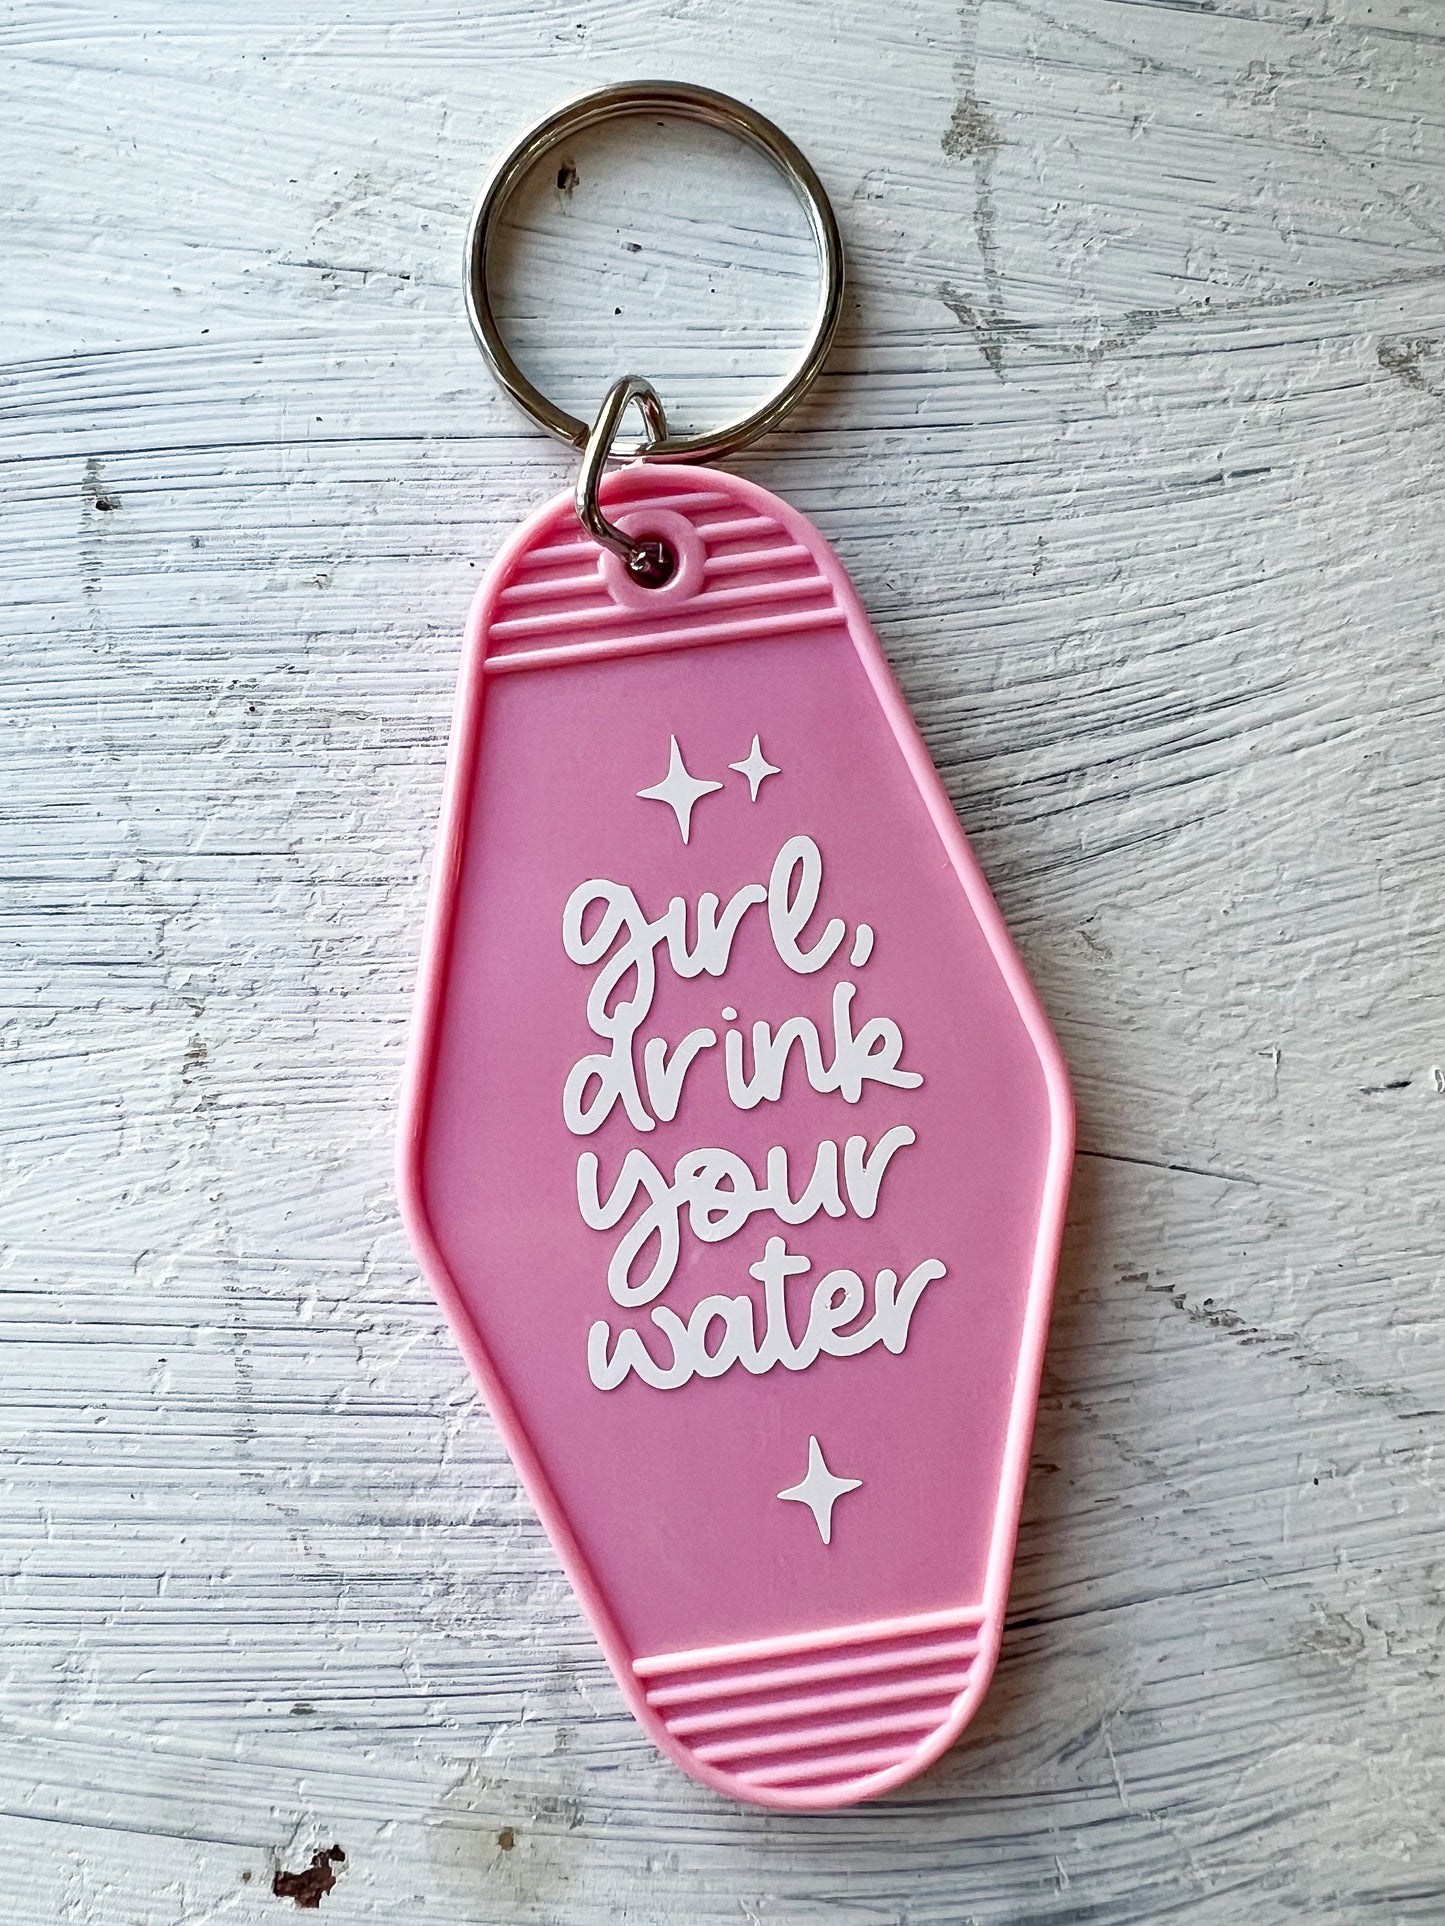 "Girl Drink Your Water" Hotel Keychain